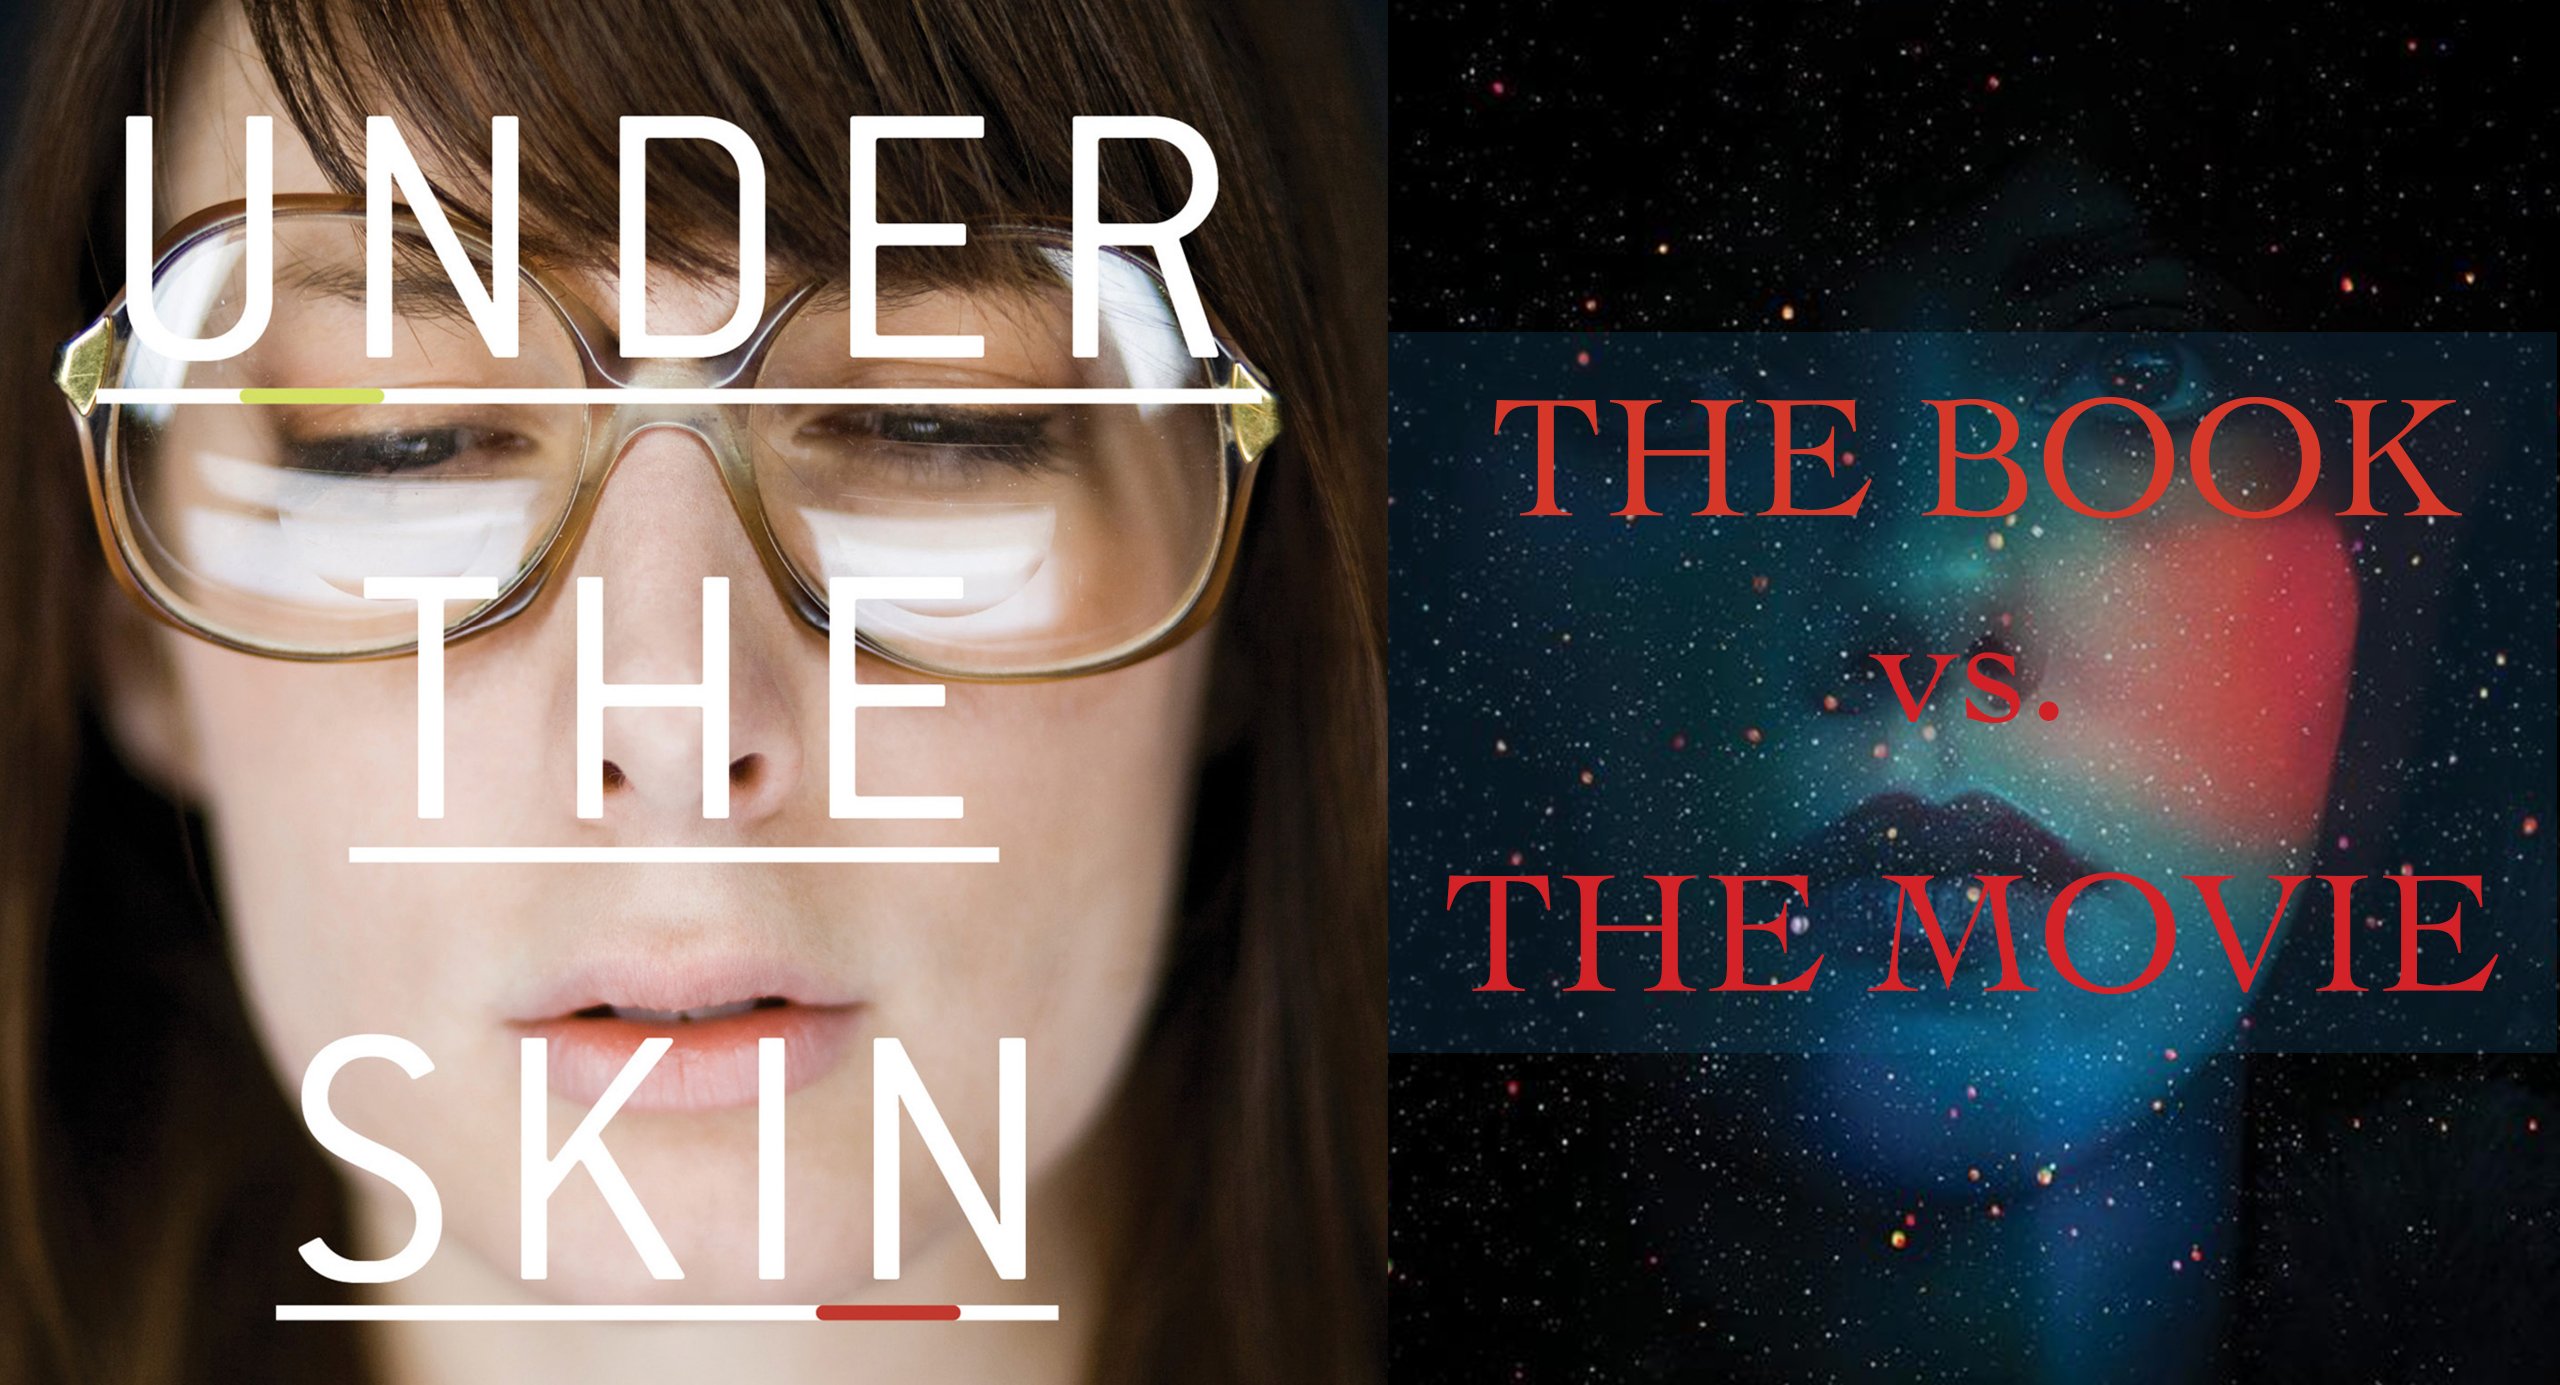 The differences between the book and movie versions of Under the Skin